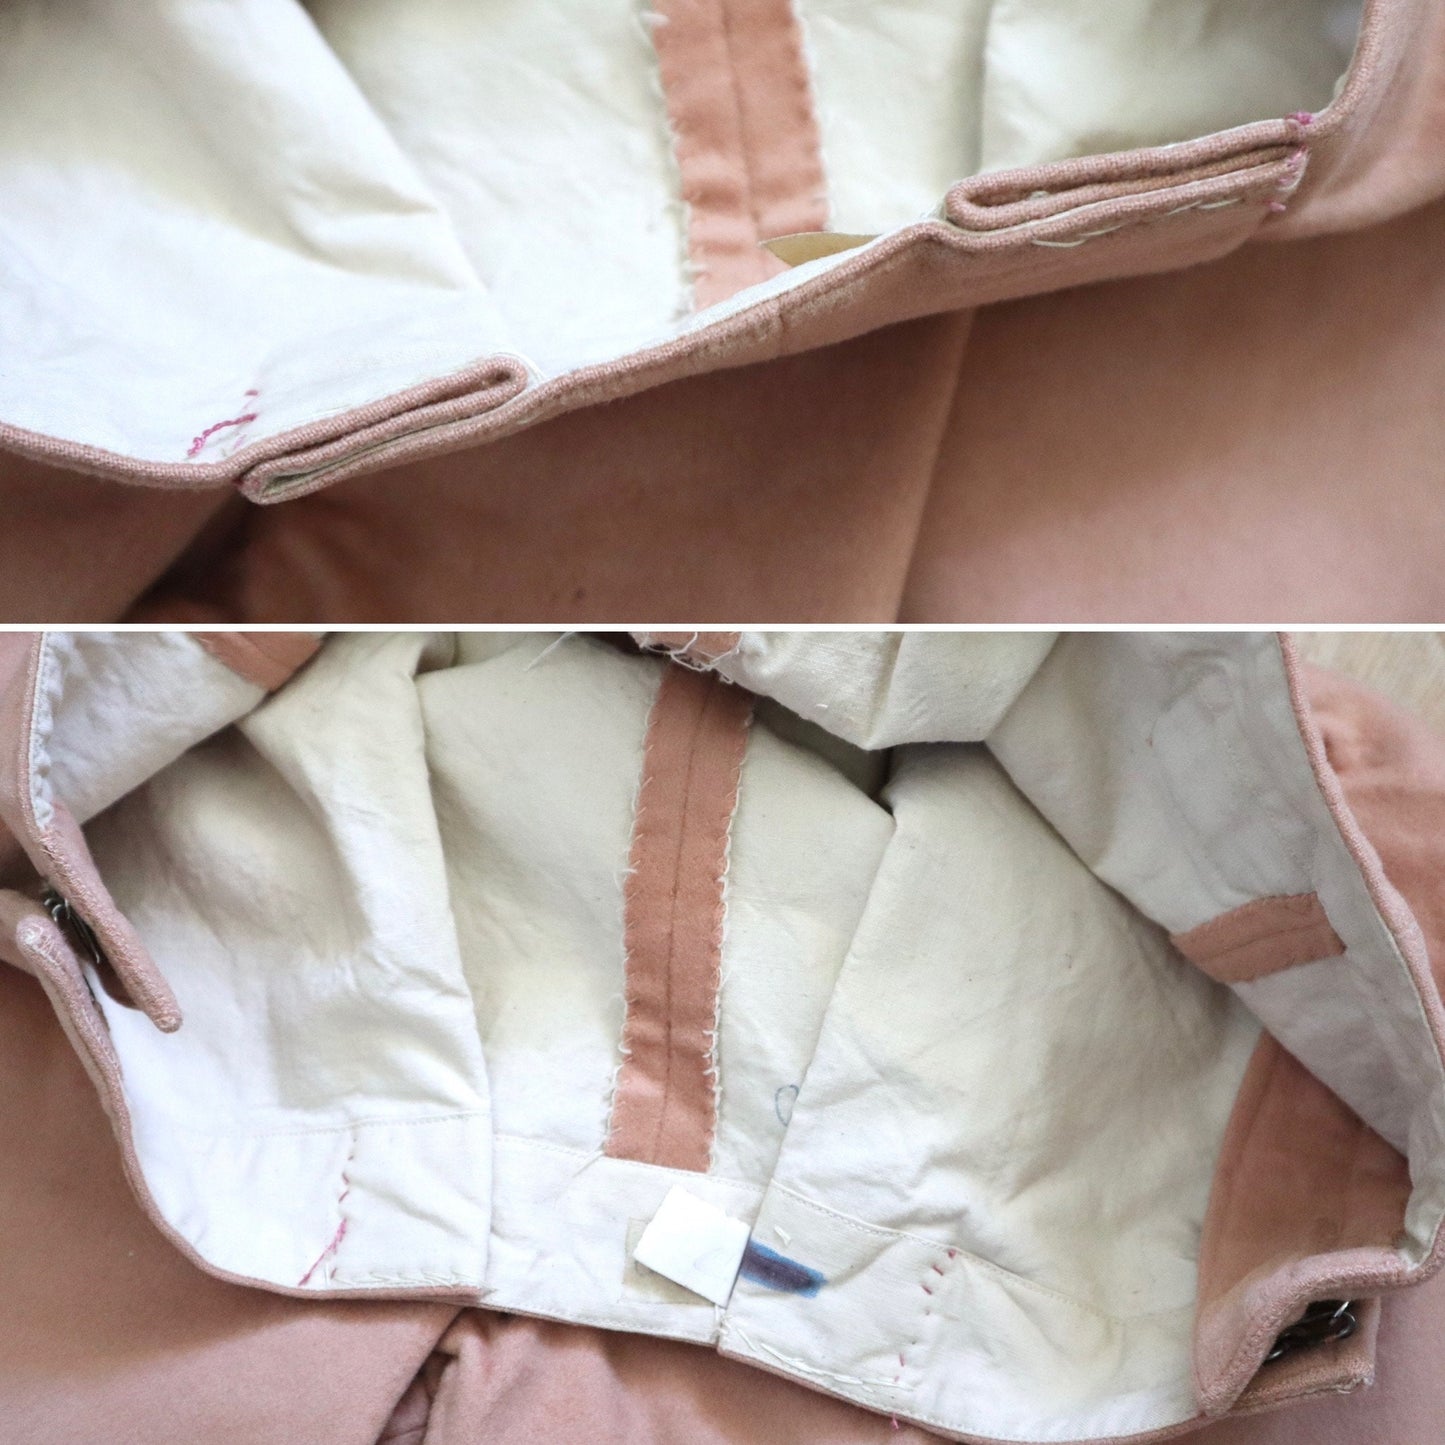 Antique French Peach Wool Breeches Pants Trousers Opera Costume Theatre Cropped